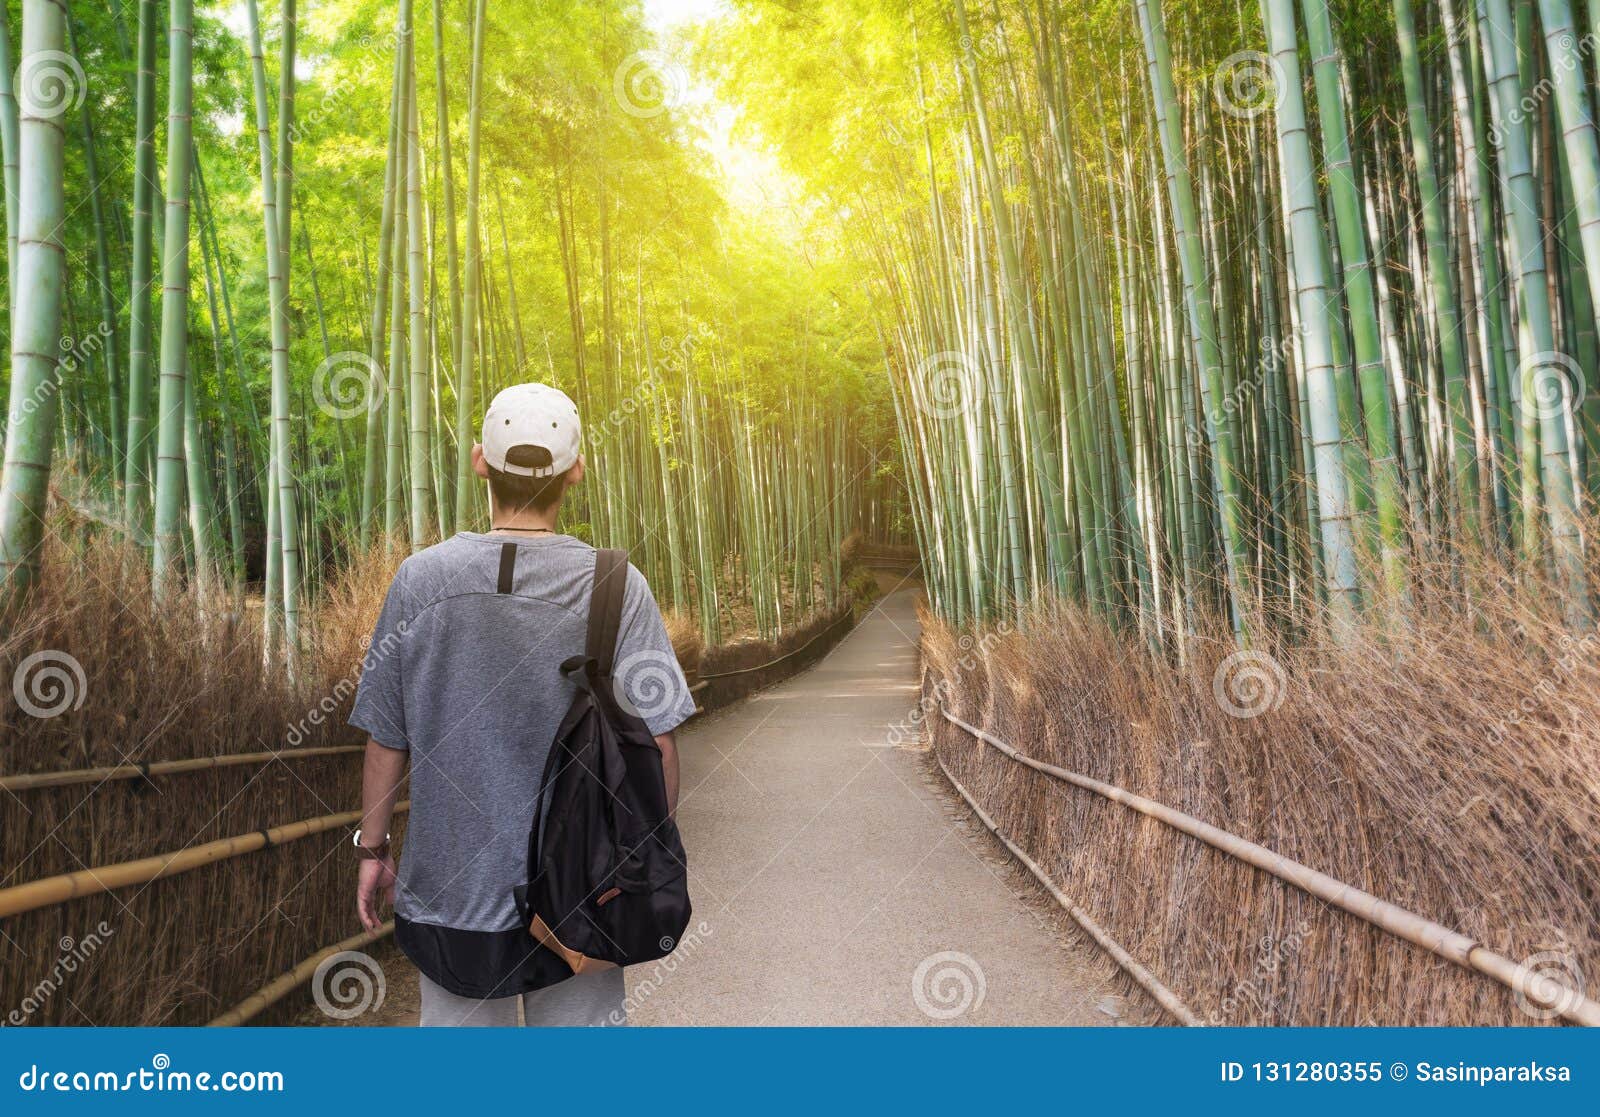 travel in japan, a man with backpack travelling at arashiyama bamboo forest, famous travel destination in kyoto japan